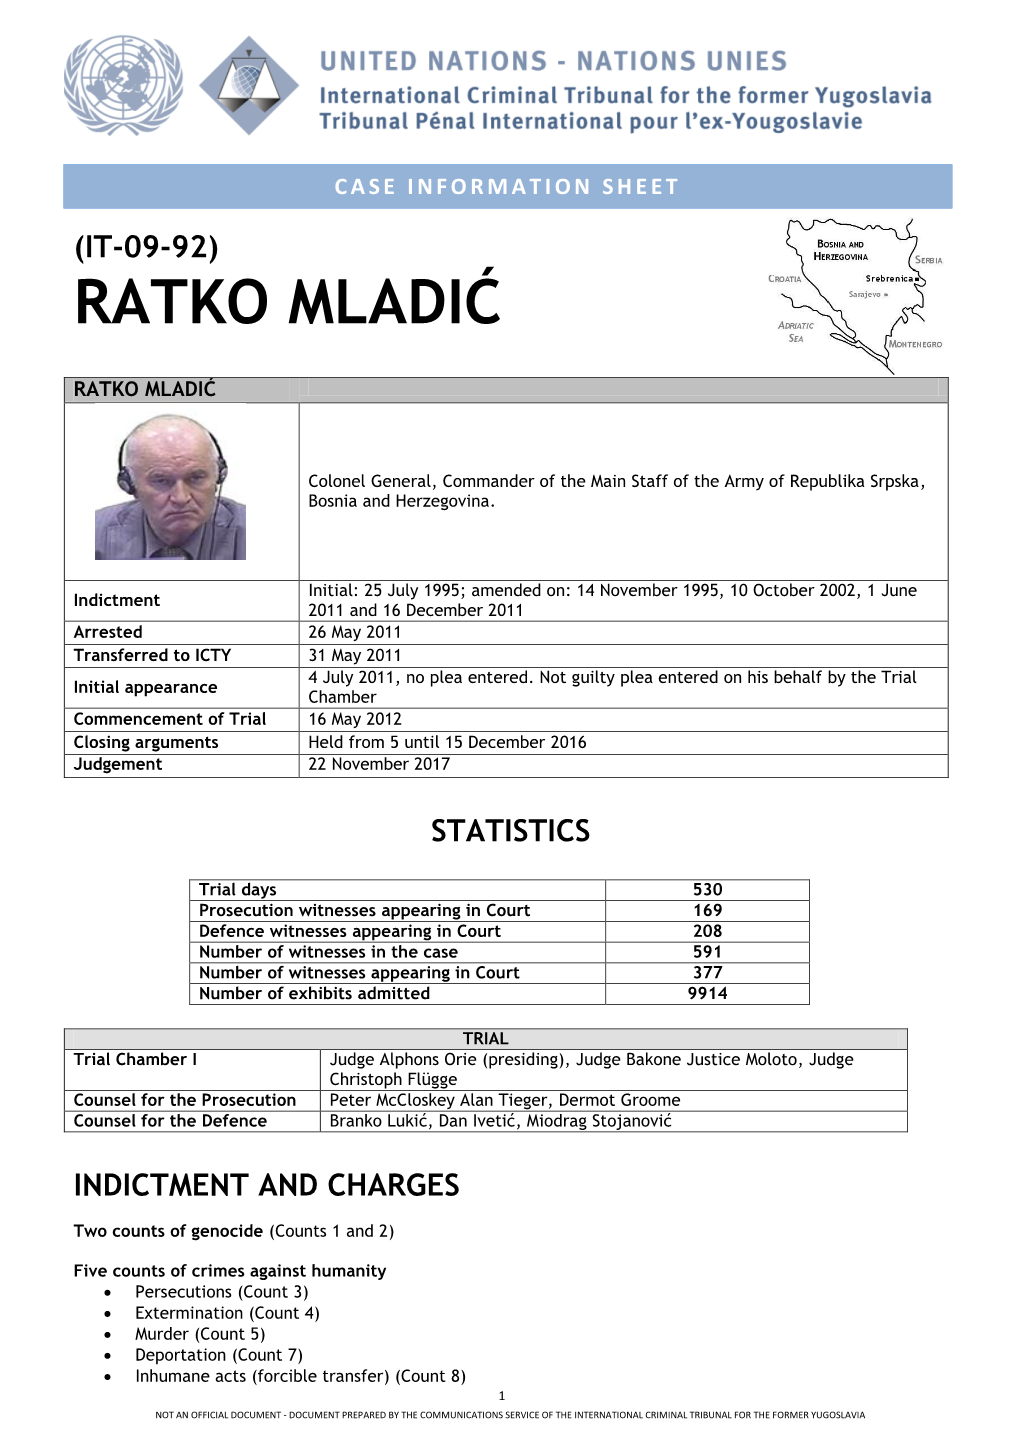 Mladic Case Took Place on 22 November 2017 at 10:00 in Courtroom I of the Tribunal